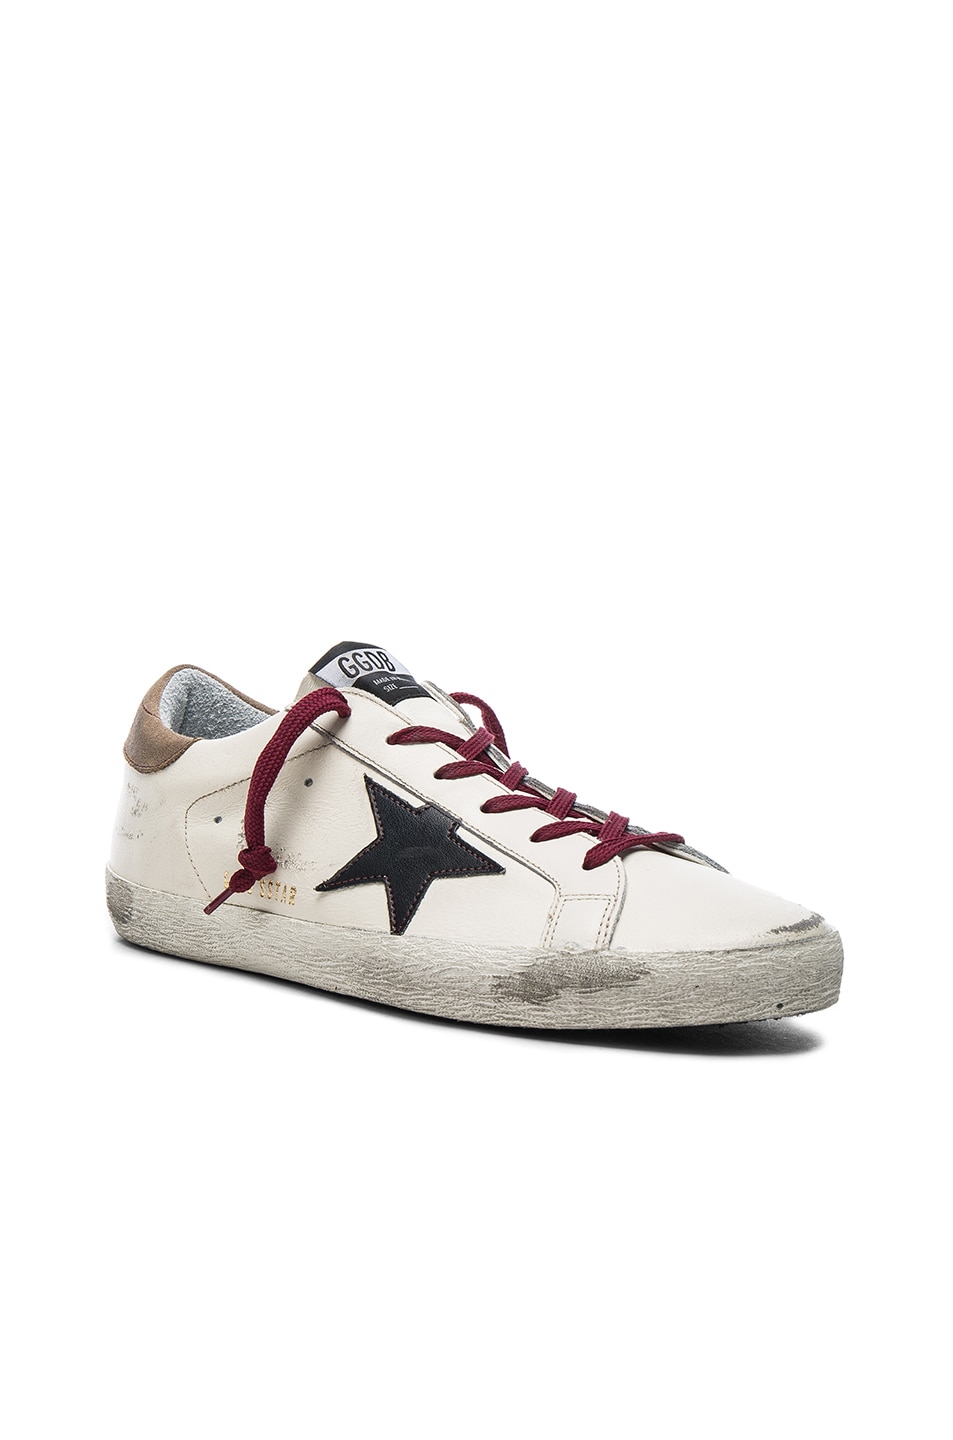 Image 1 of Golden Goose Leather Superstar Sneakers in Black, Cream & Red